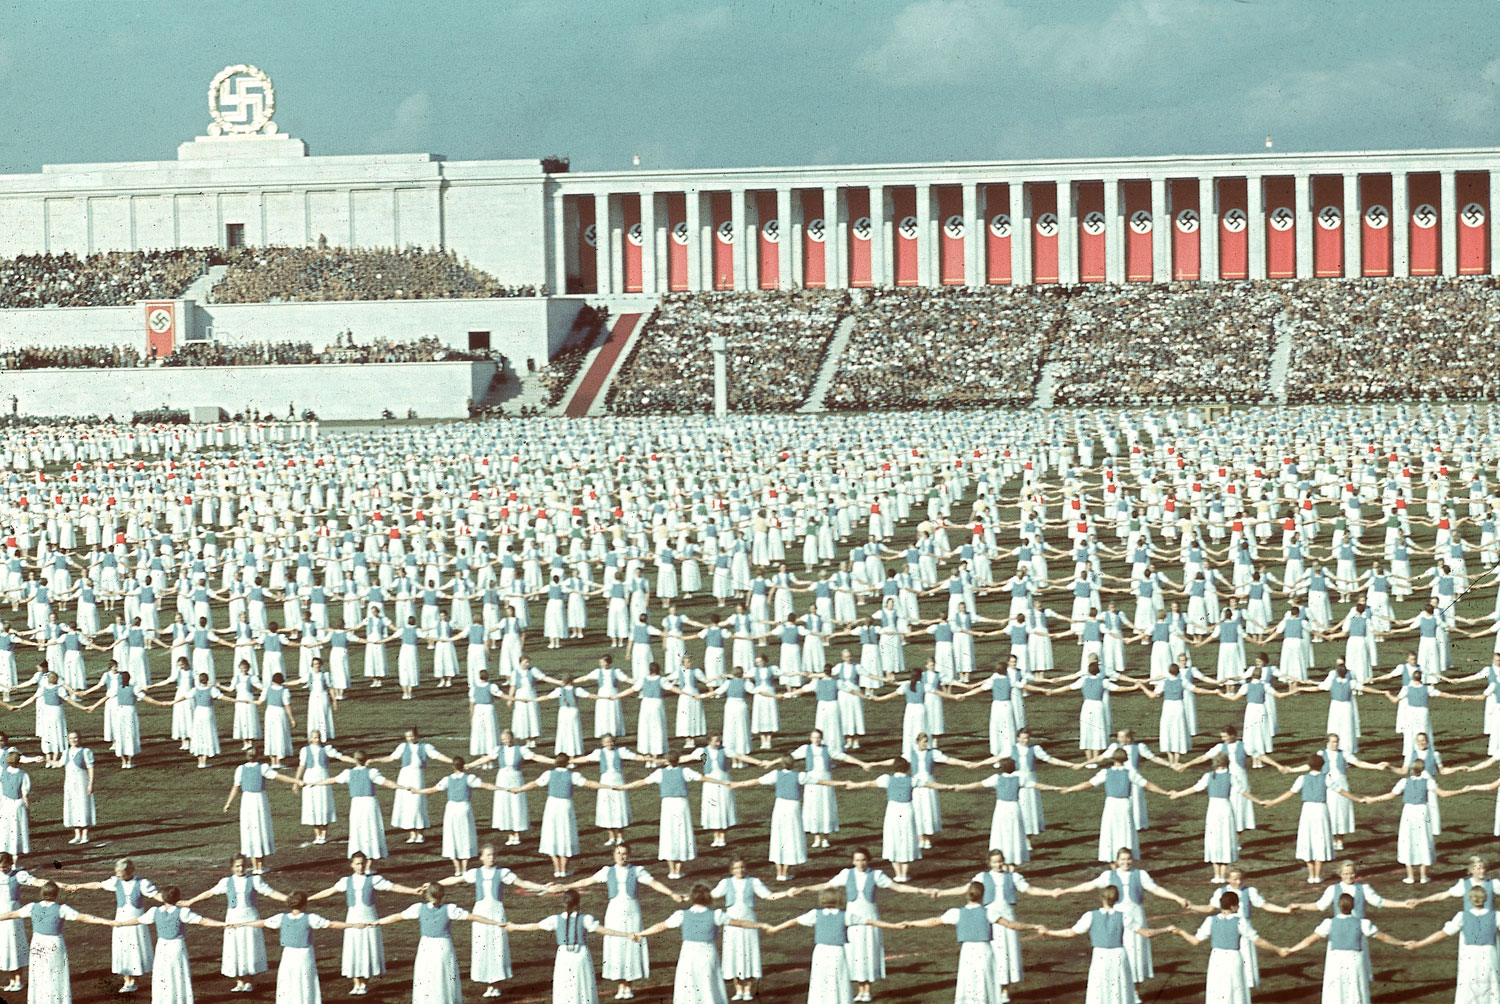 League of German Girls dancing during the 1938 Reich Party Congress, Nuremberg, Germany